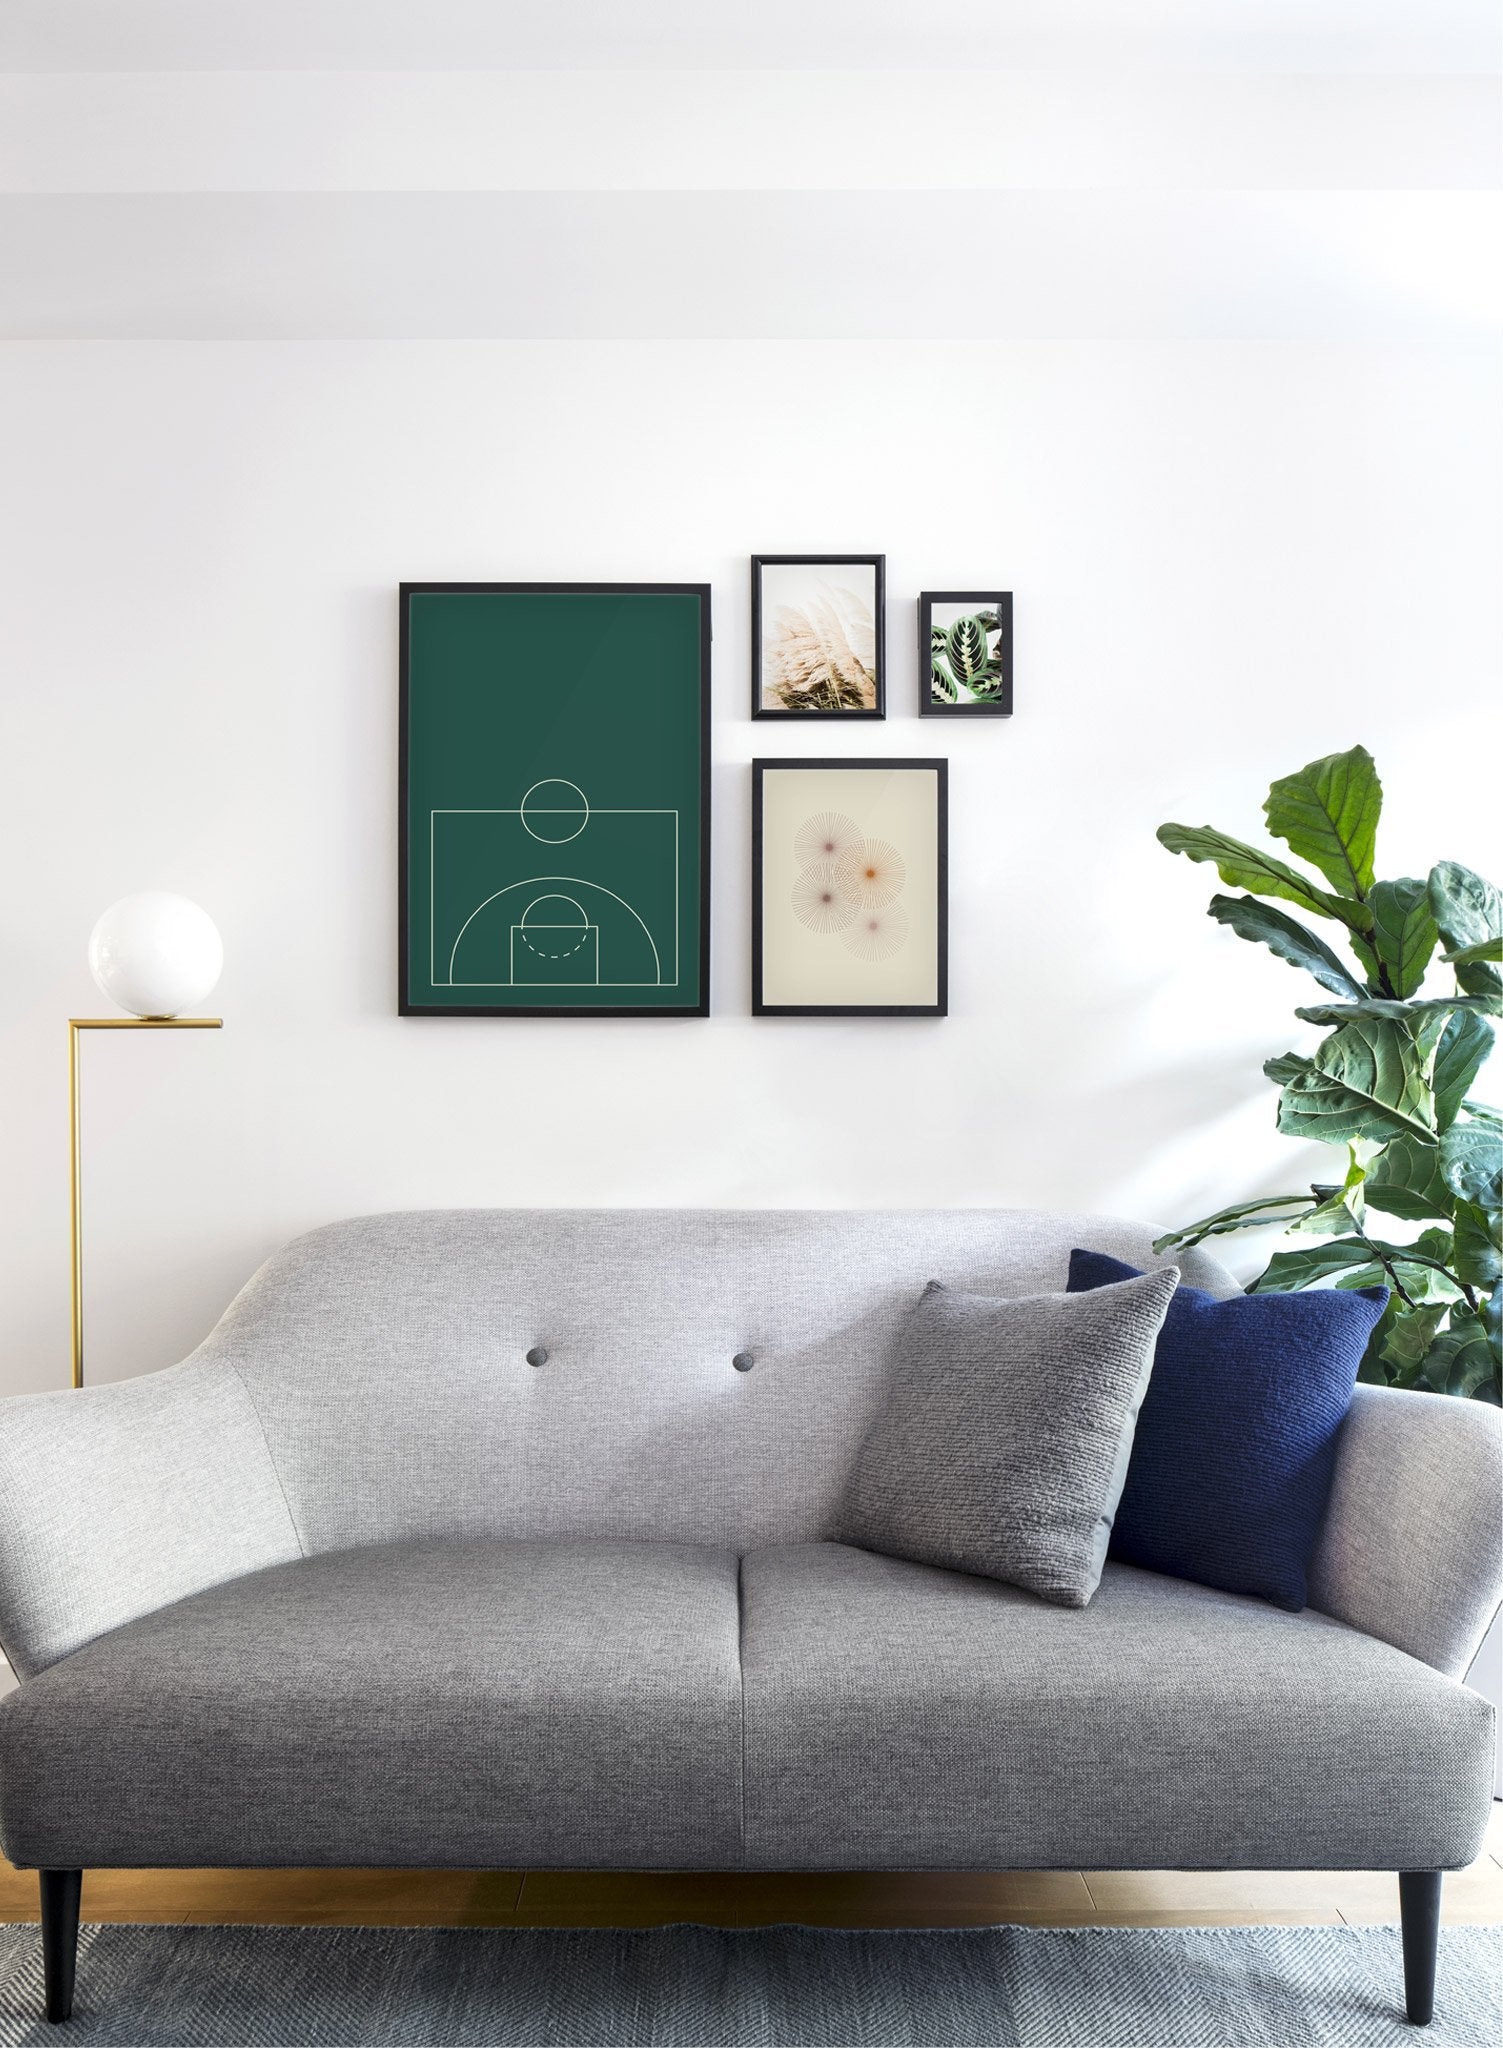 Free-Throw modern minimalist abstract design poster by Opposite Wall - Living room with couch